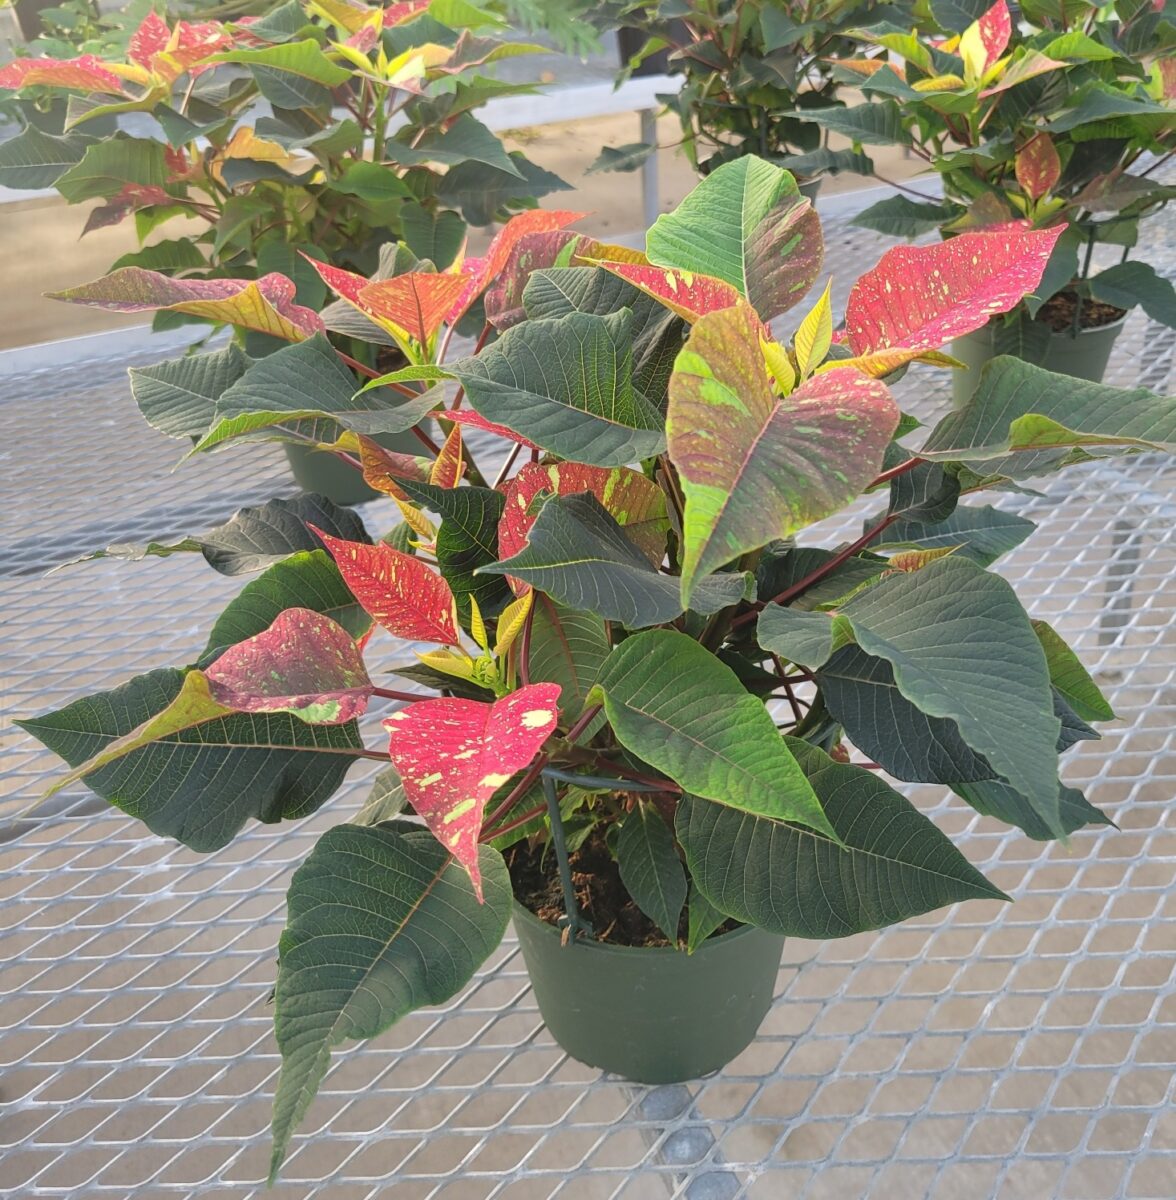 Poinsettiea with red and white leaves